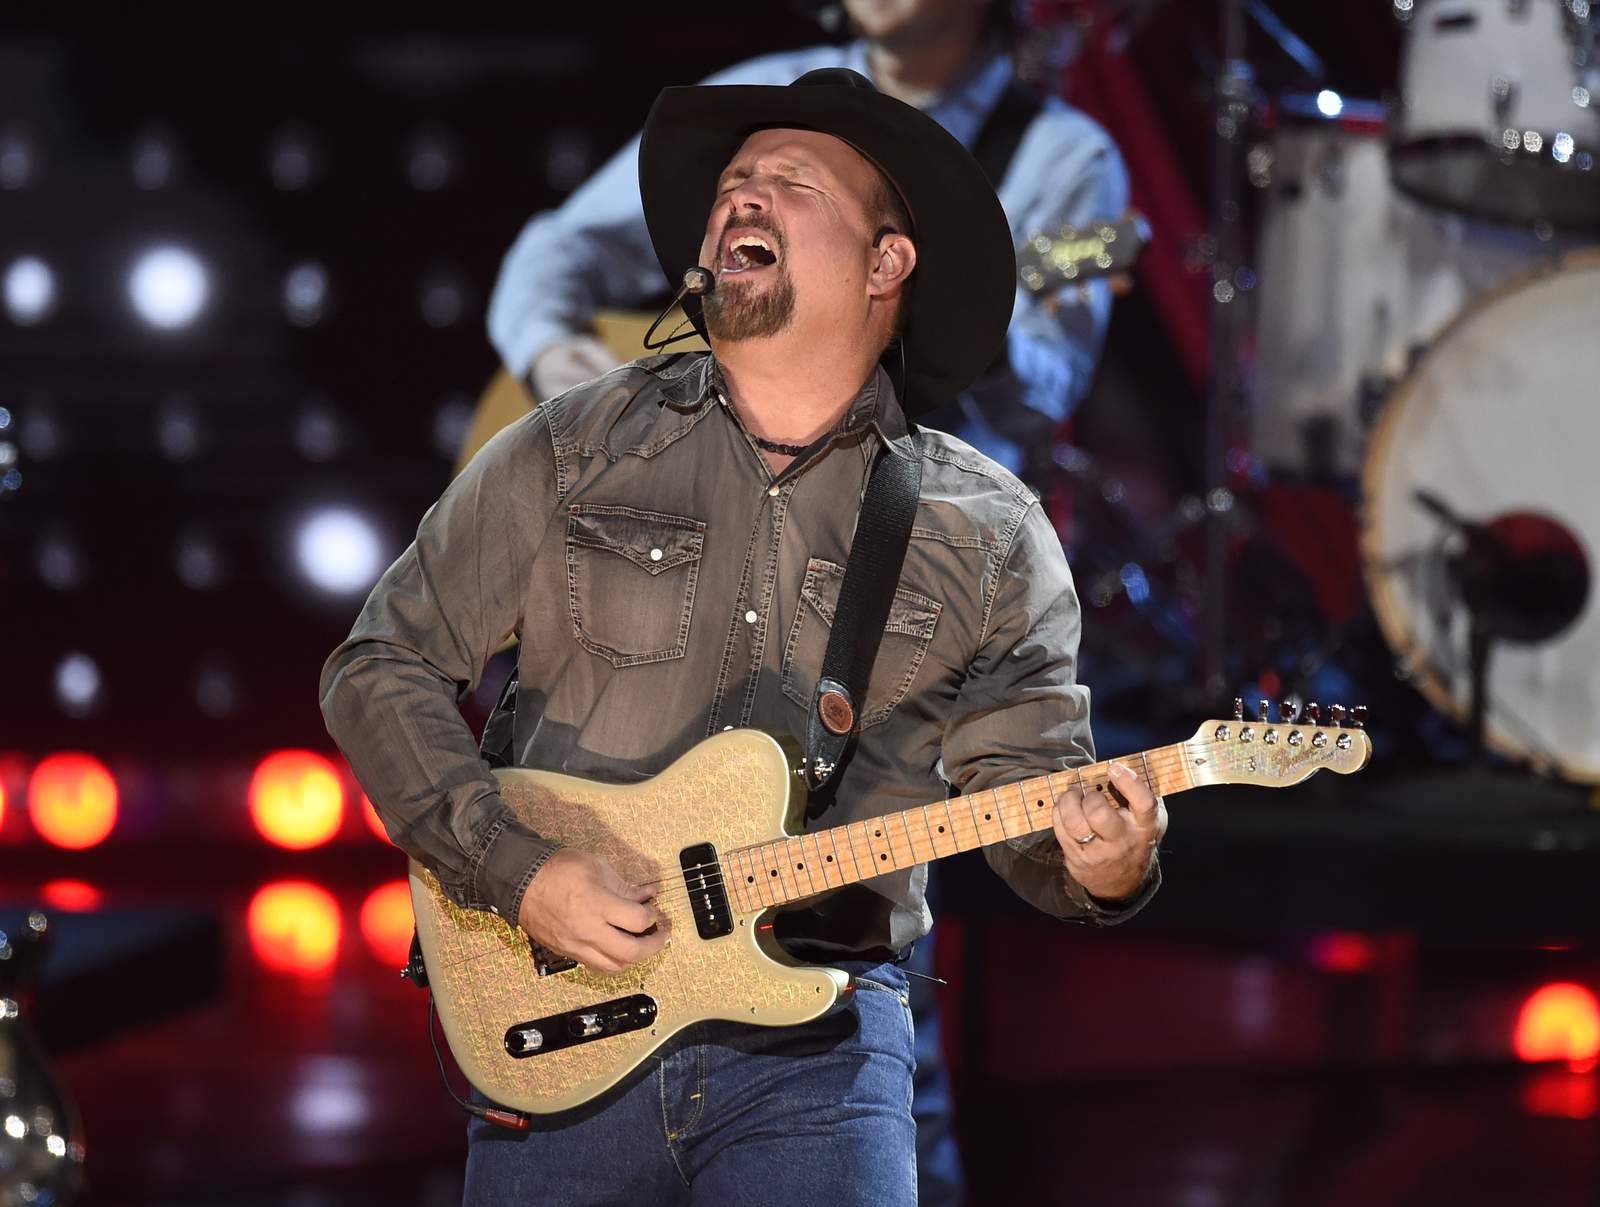 Tickets for Garth Brooks drive-in concert at Fiesta Texas, New Braunfels theaters go on sale Friday